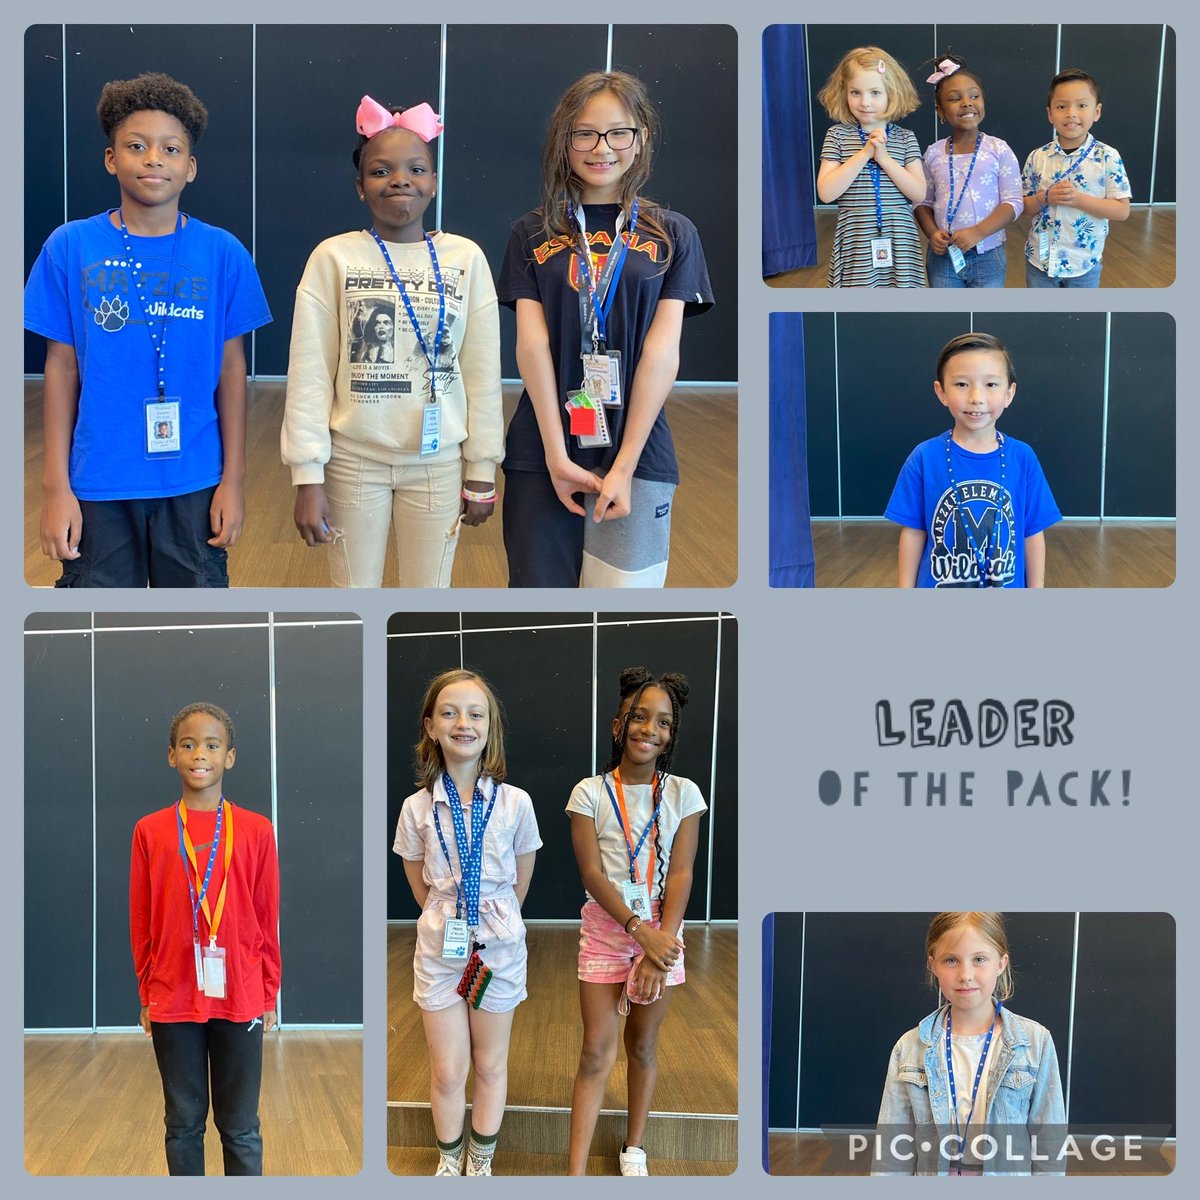 Congratulations to these Wildcats who earned their Leader of the Pack Badge today! #MatzkeProud